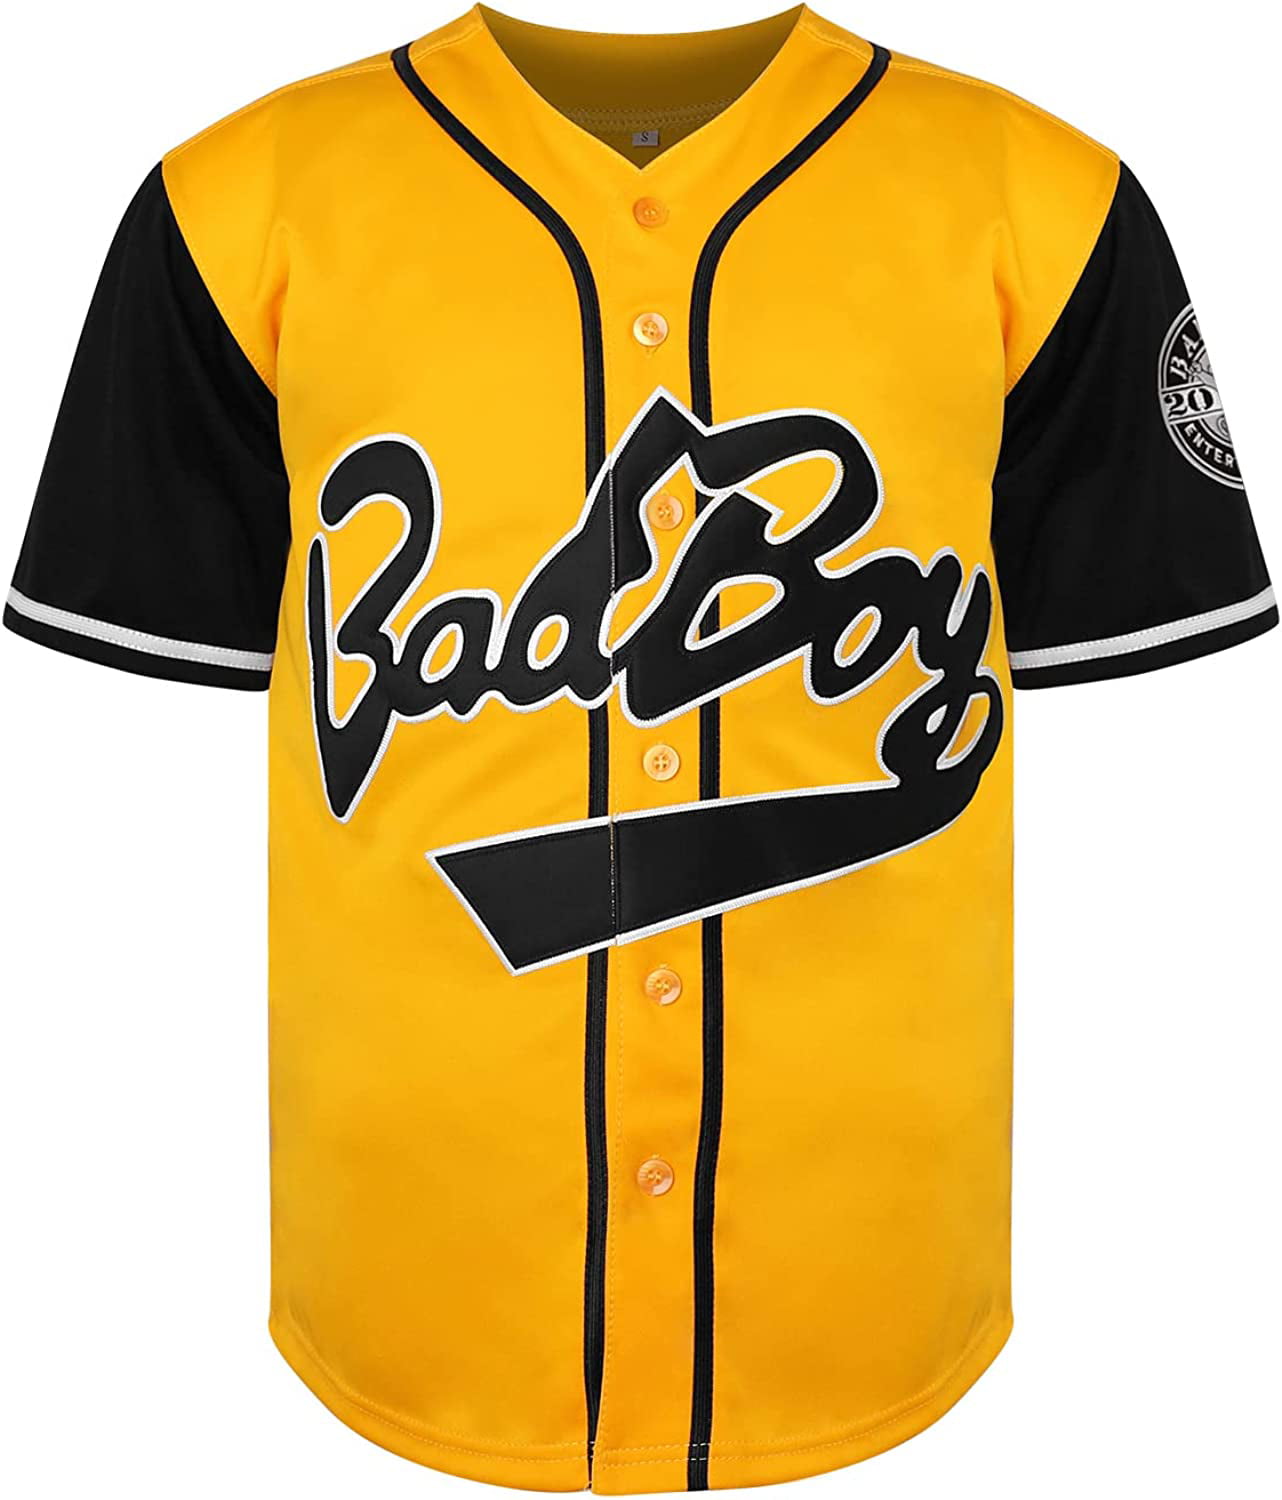 Acail #10 Biggie Bad Boy Movie Baseball Jersey Stitched 90s Hip Hop Unisex Clothing for Party Size S-XXXL